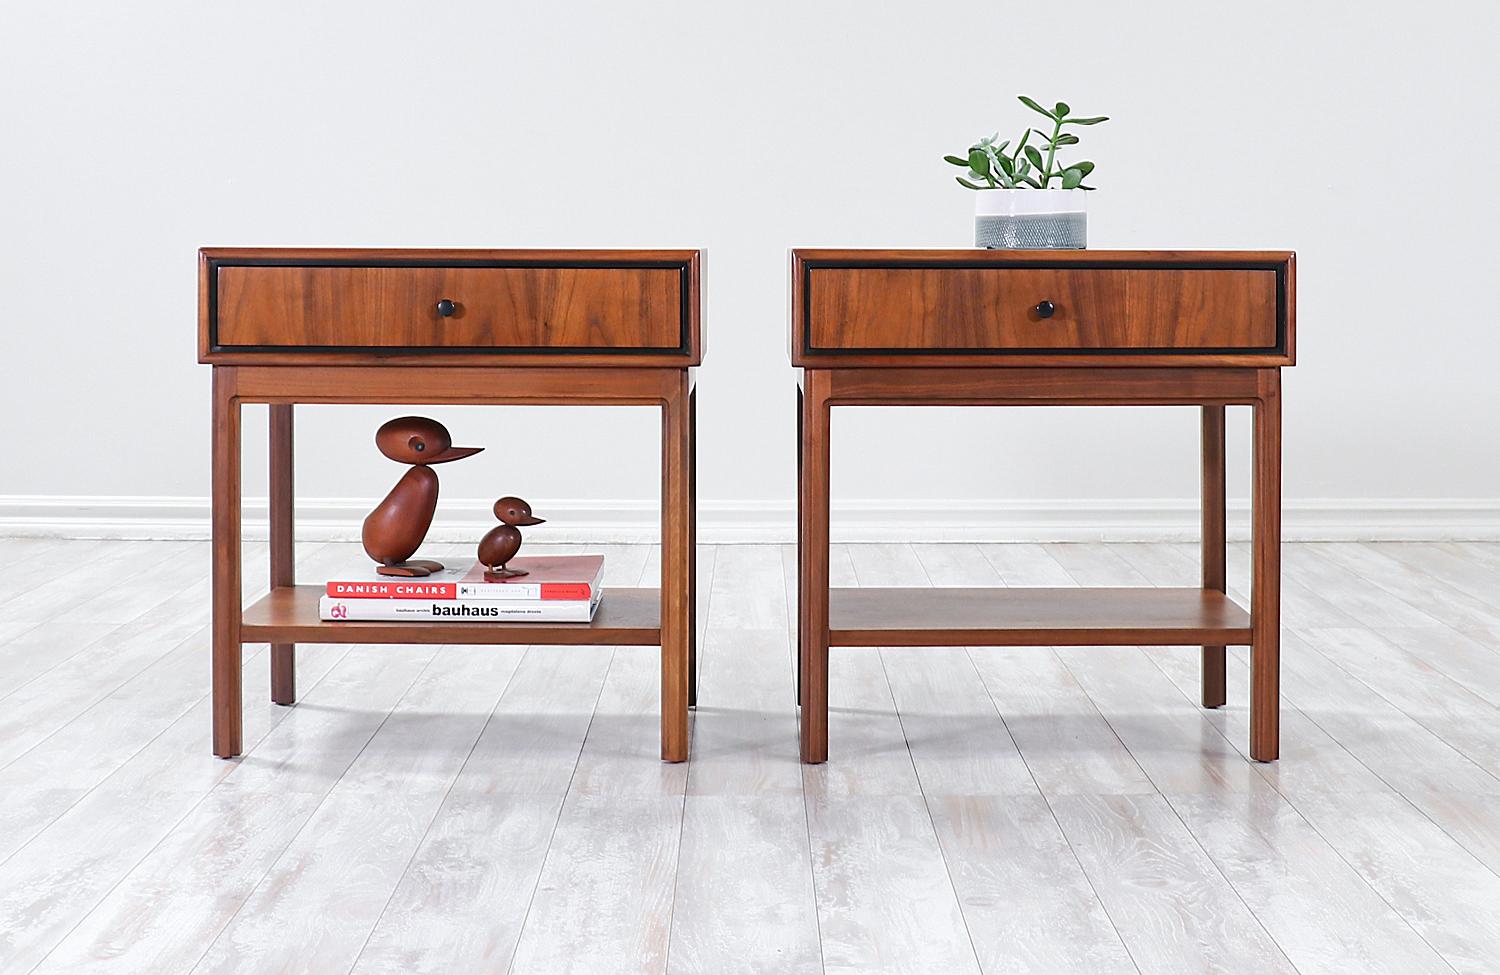 Two-tier nightstands designed by Jack Cartwright for Founders circa 1963.